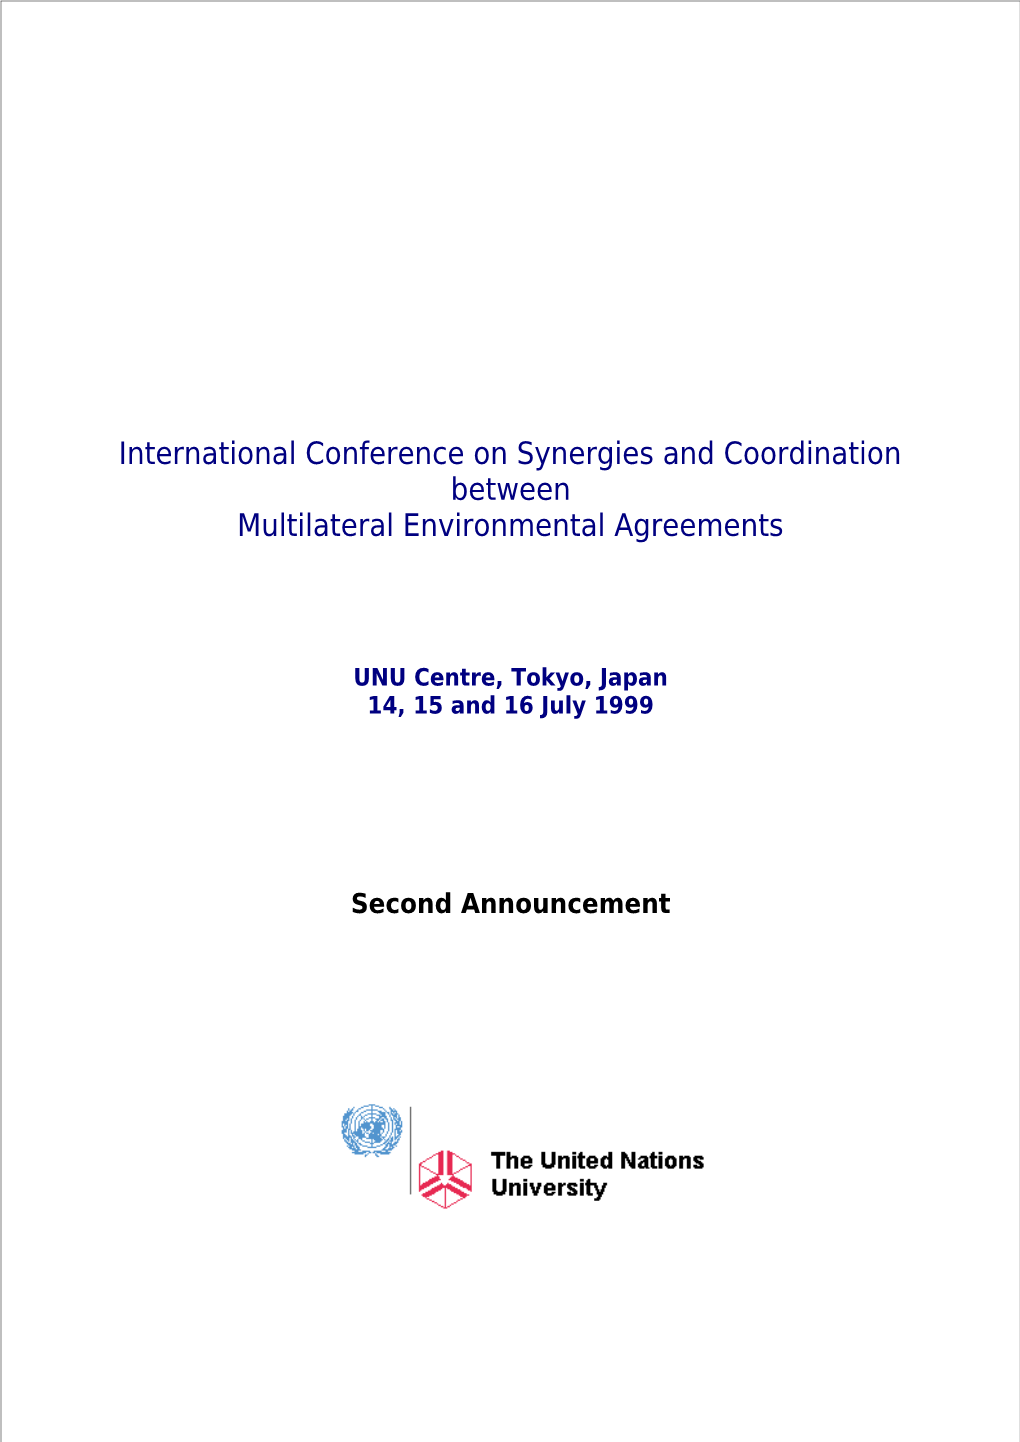 International Conference on Synergies and Coordination Between